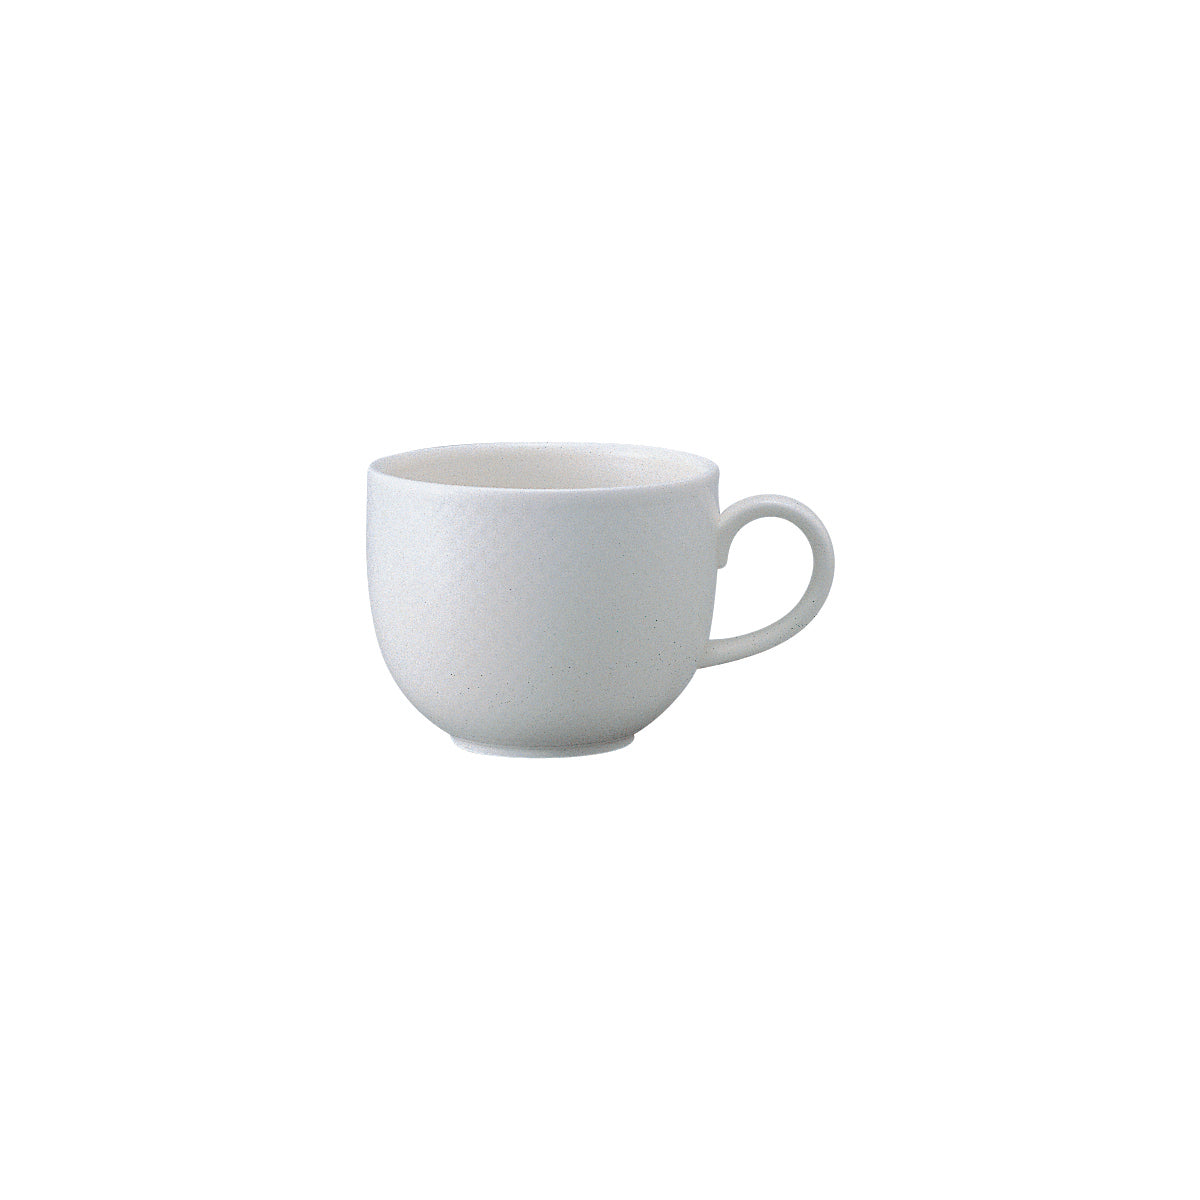 VB16-2155-1270 Villeroy And Boch Villeroy And Boch Easy White Cup No. 2 220ml Tomkin Australia Hospitality Supplies